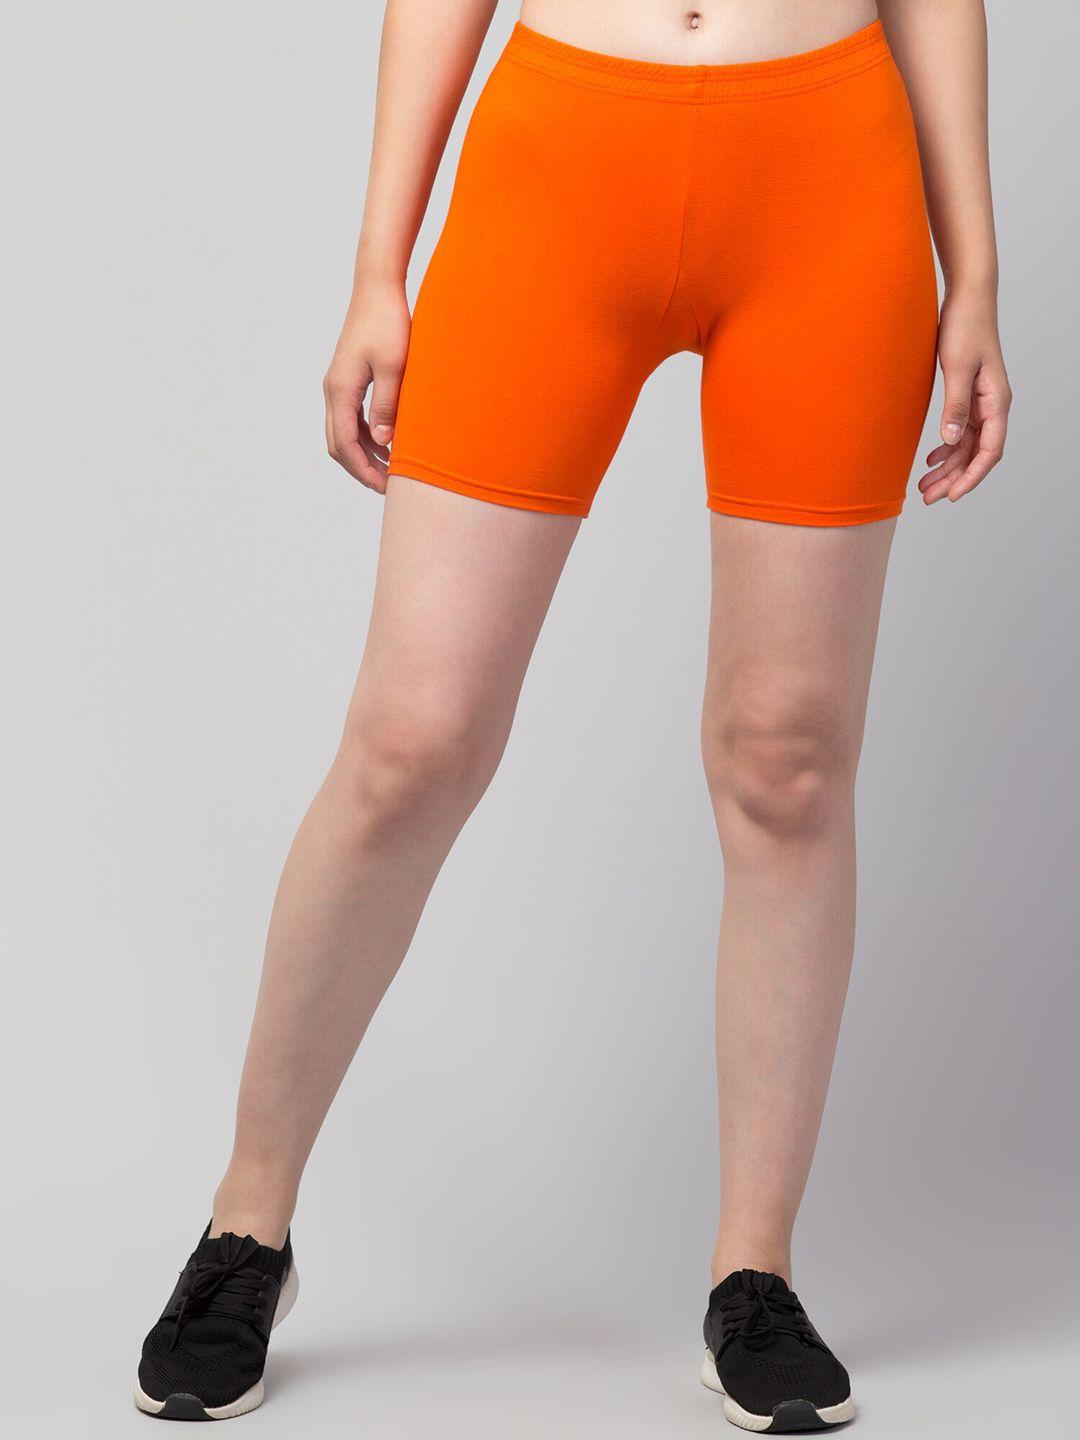 apraa & parma women orange solid cotton skinny fit cycling sports shorts